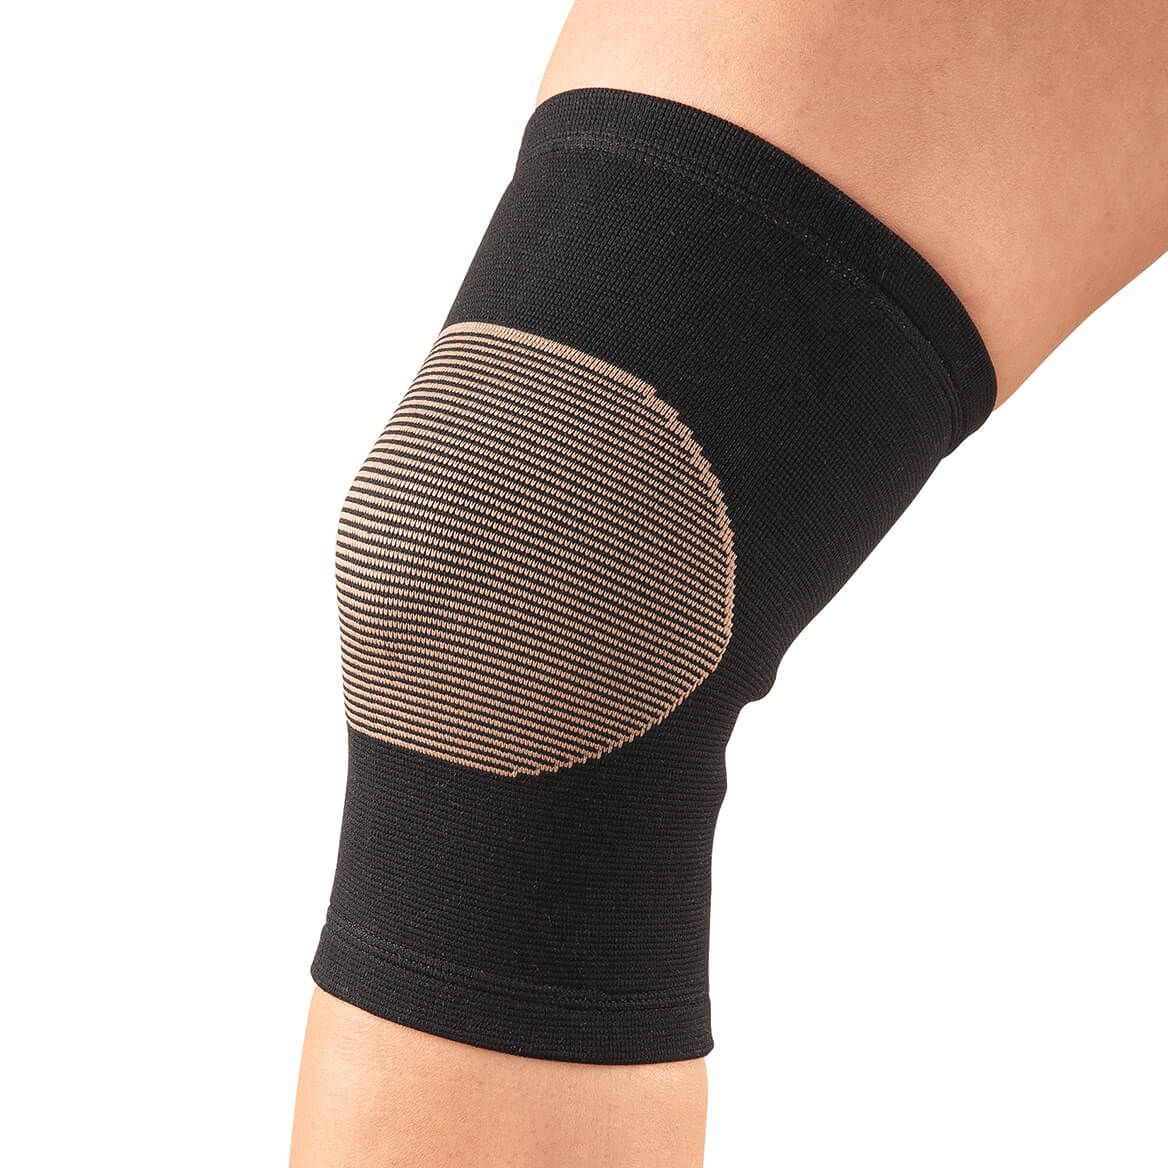 Copper Therapy Knee Support + '-' + 363686